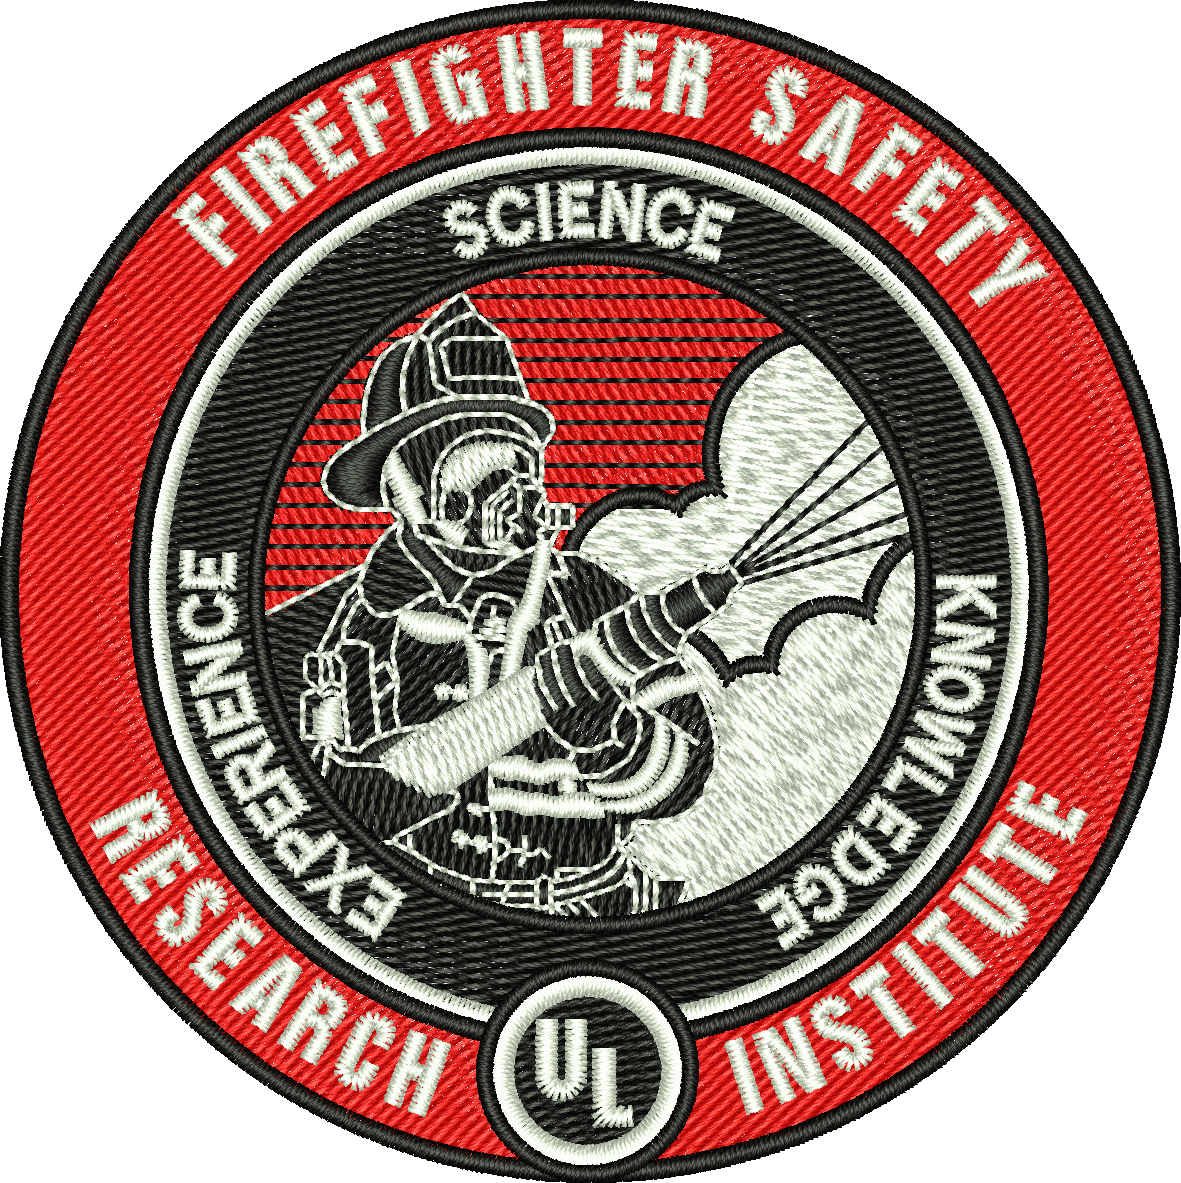 Week Of - Ul Firefighter Safety And Research (1181x1183)